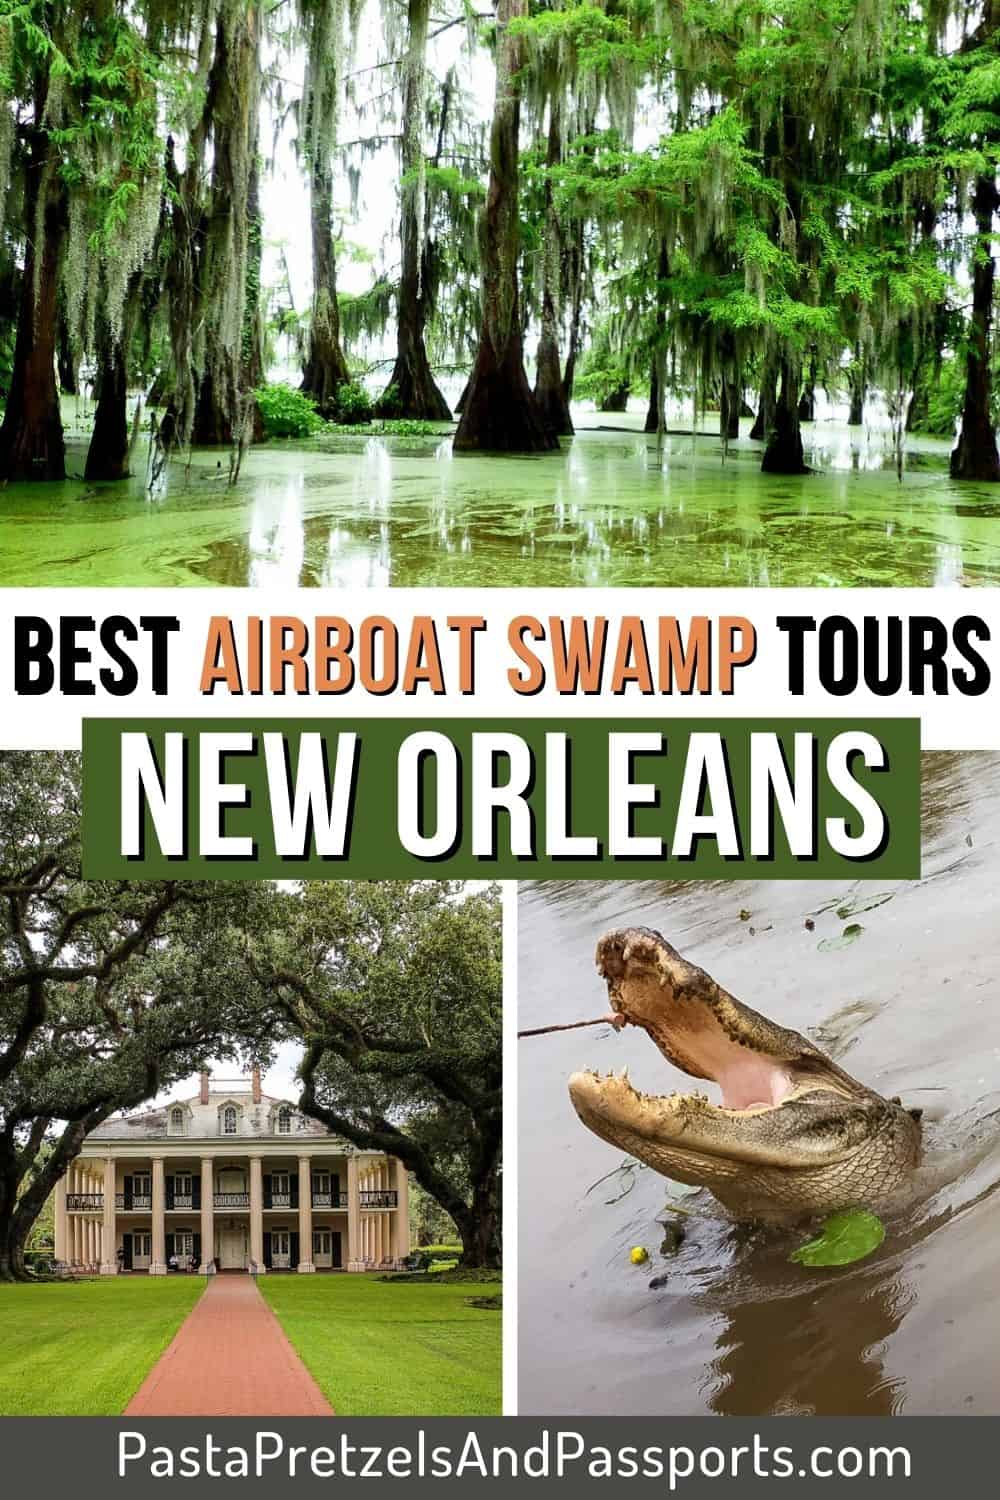 New-Orleans-Swamp-Tours-Pinterest-Pin-1